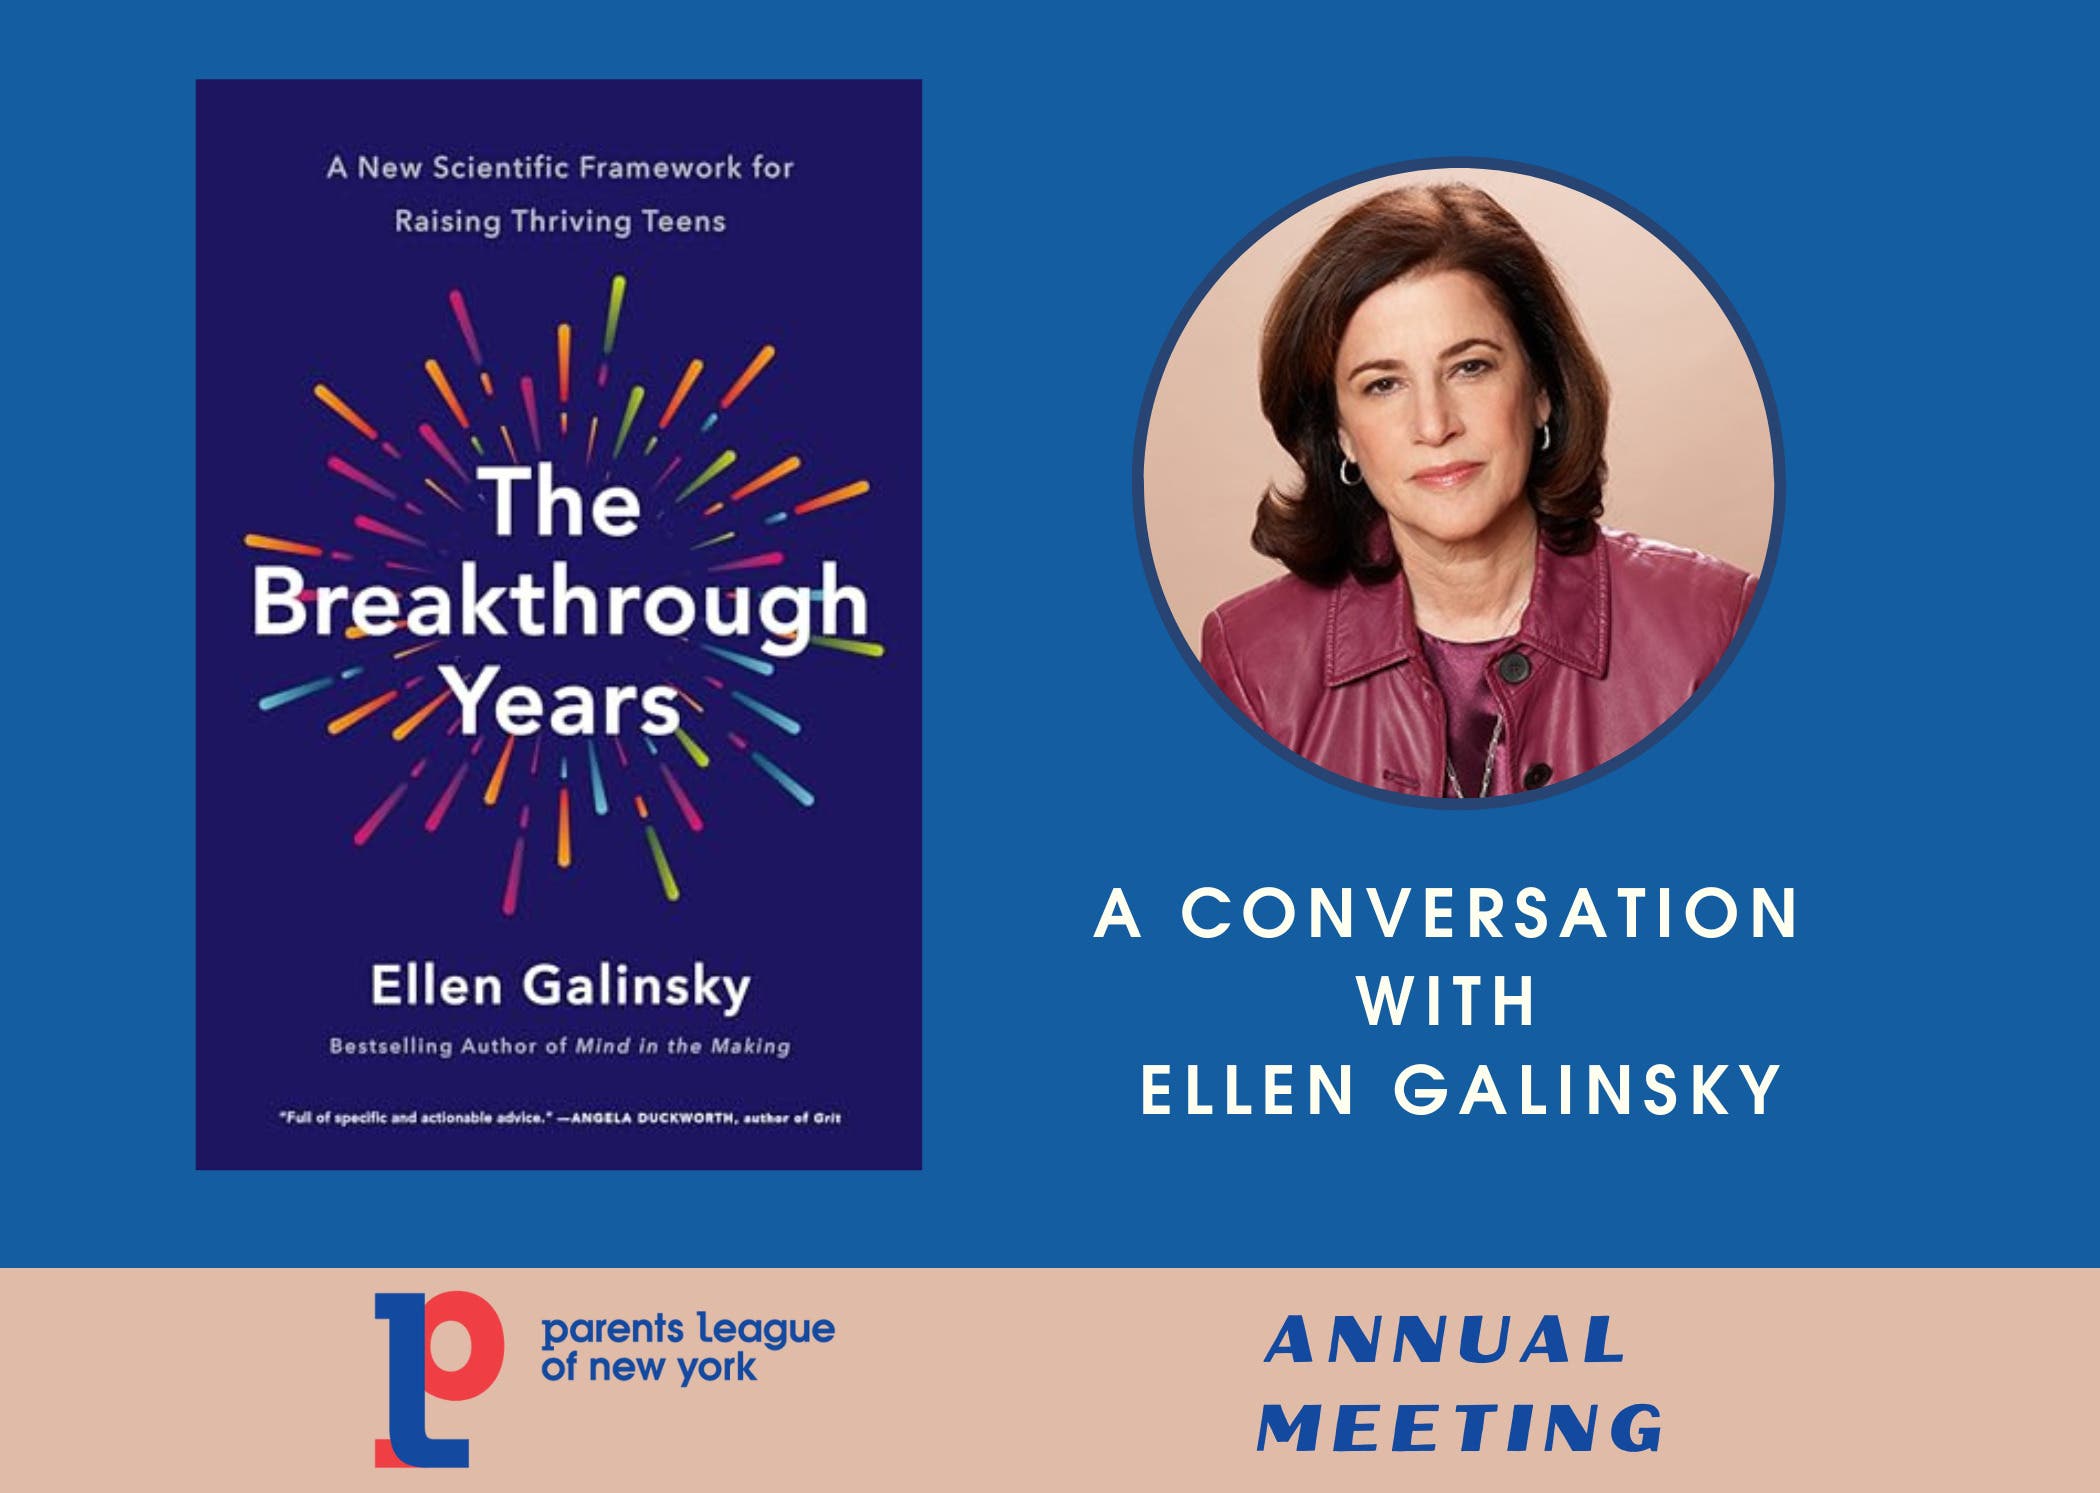 Annual Meeting and Book Talk: The Breakthrough Years